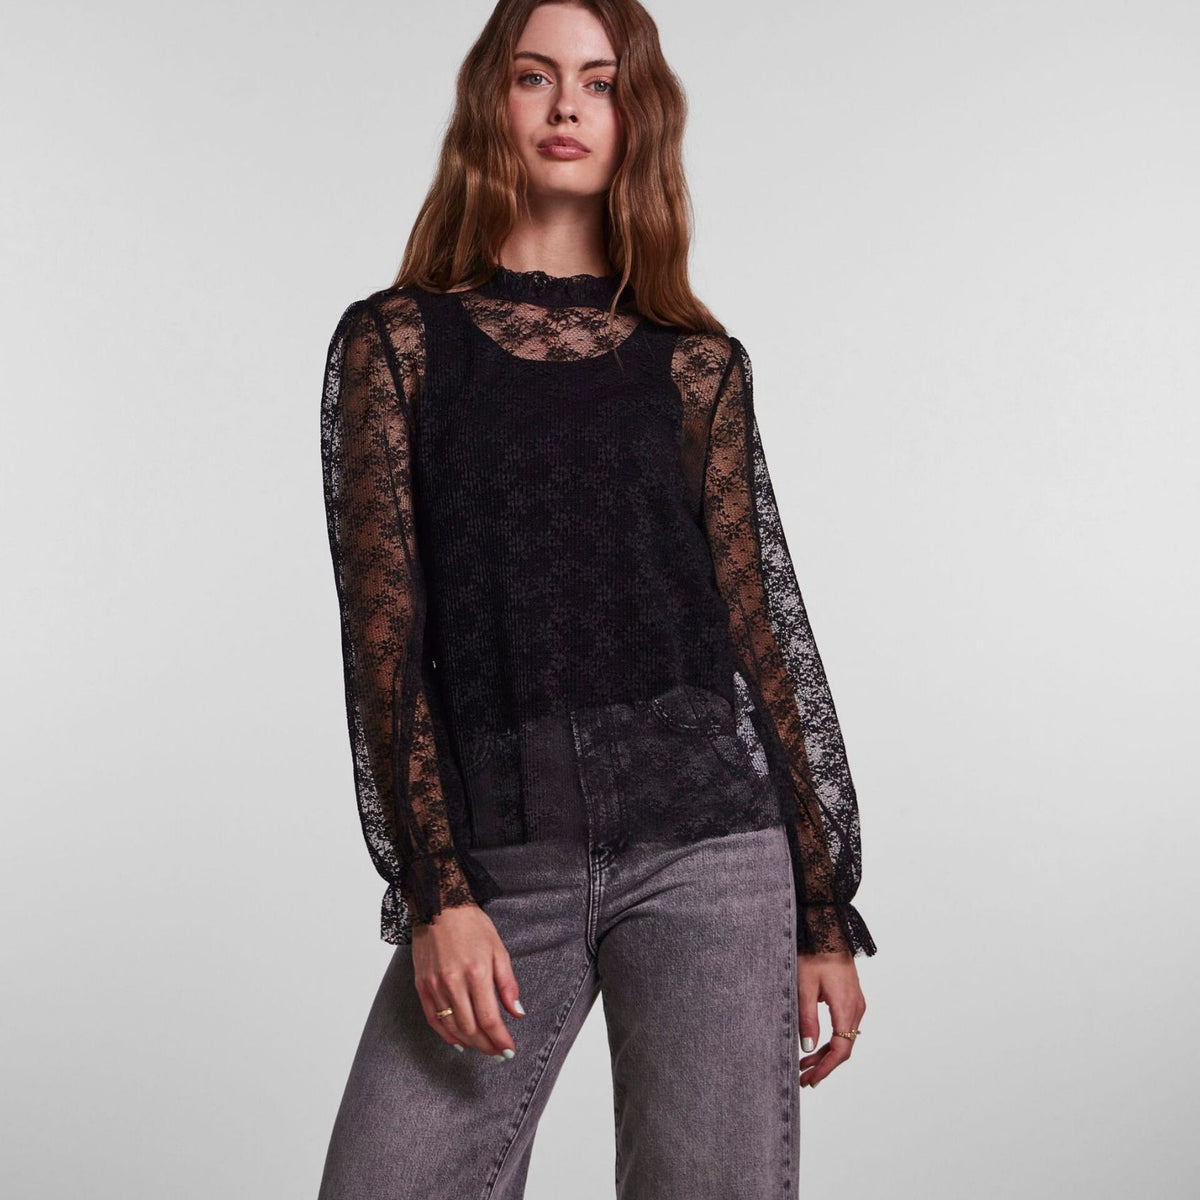 Pieces - May LS Lace Top (Black)